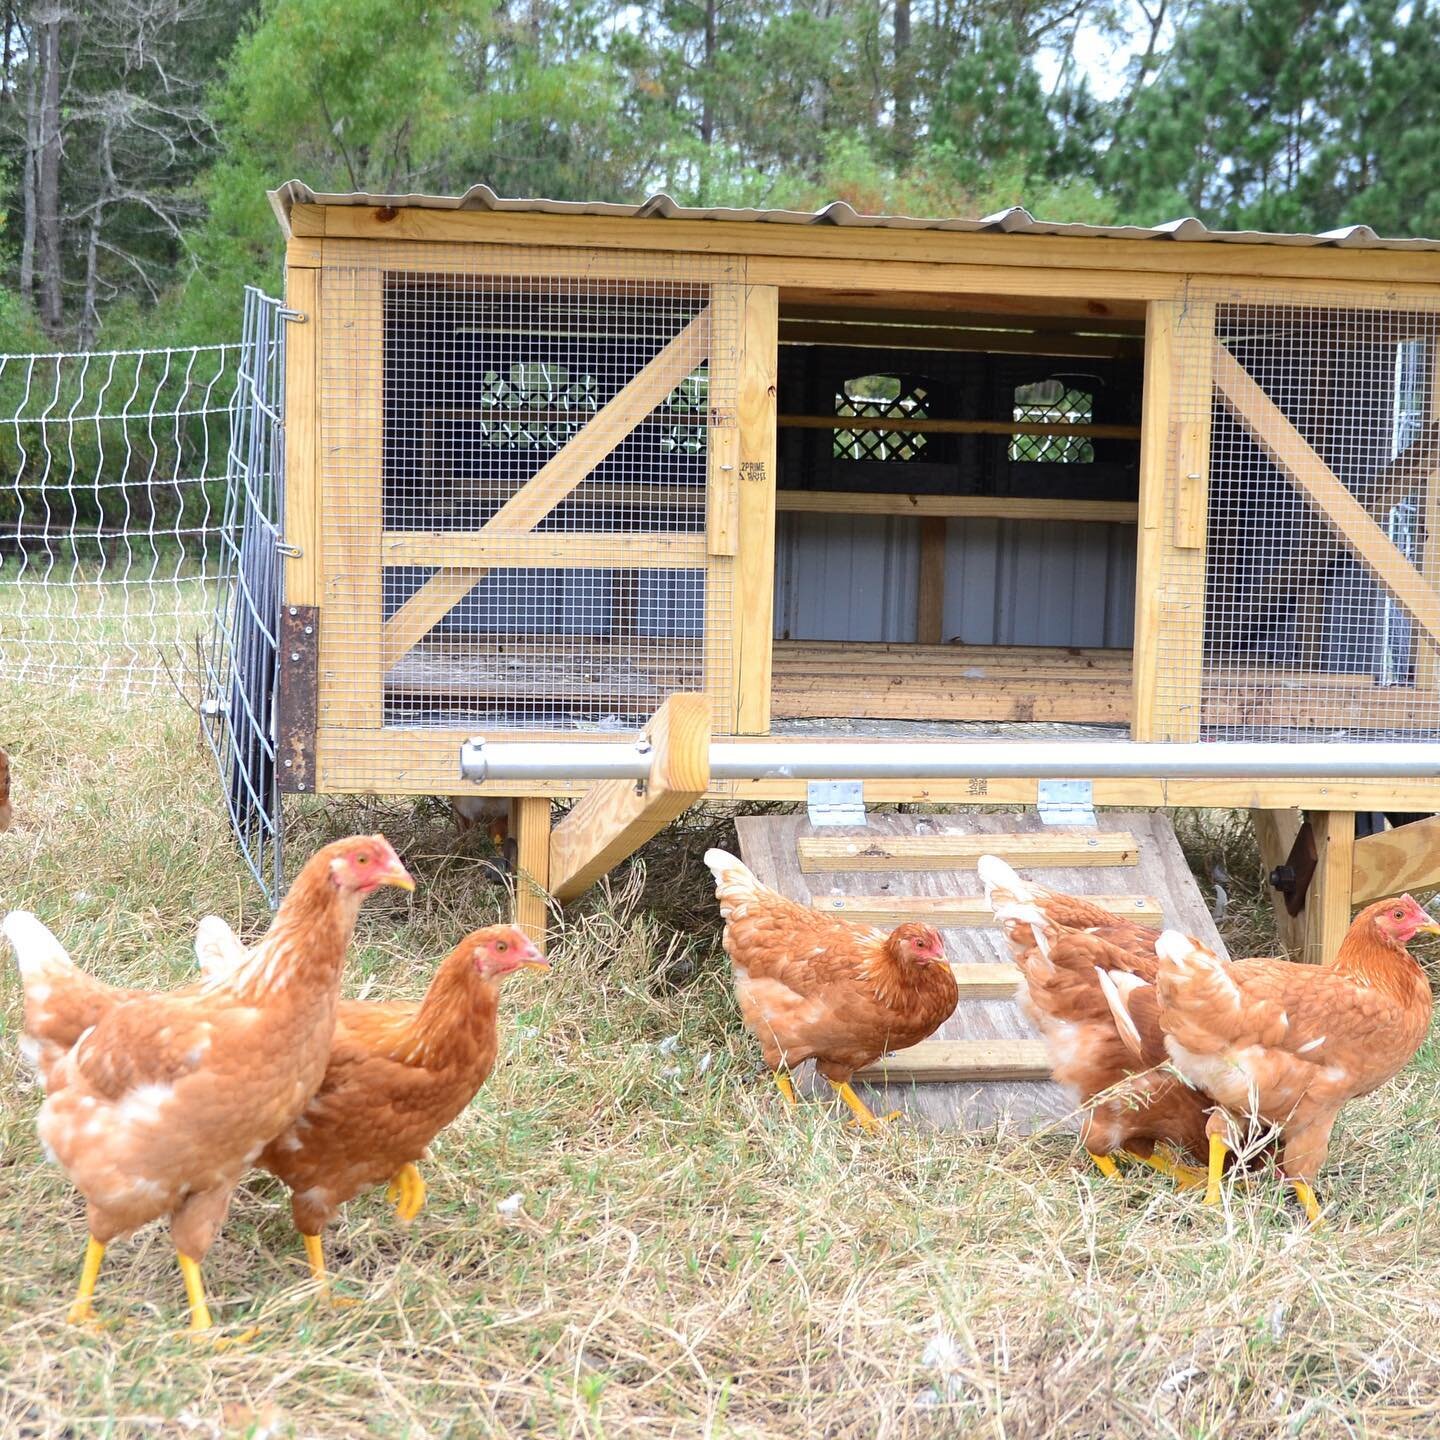 Our chickens live in mobile chicken homes to ensure they are always on fresh grass and to move their manure around to evenly fertilize the grass. This is better for the chickens, land, and ultimately us and the earth!